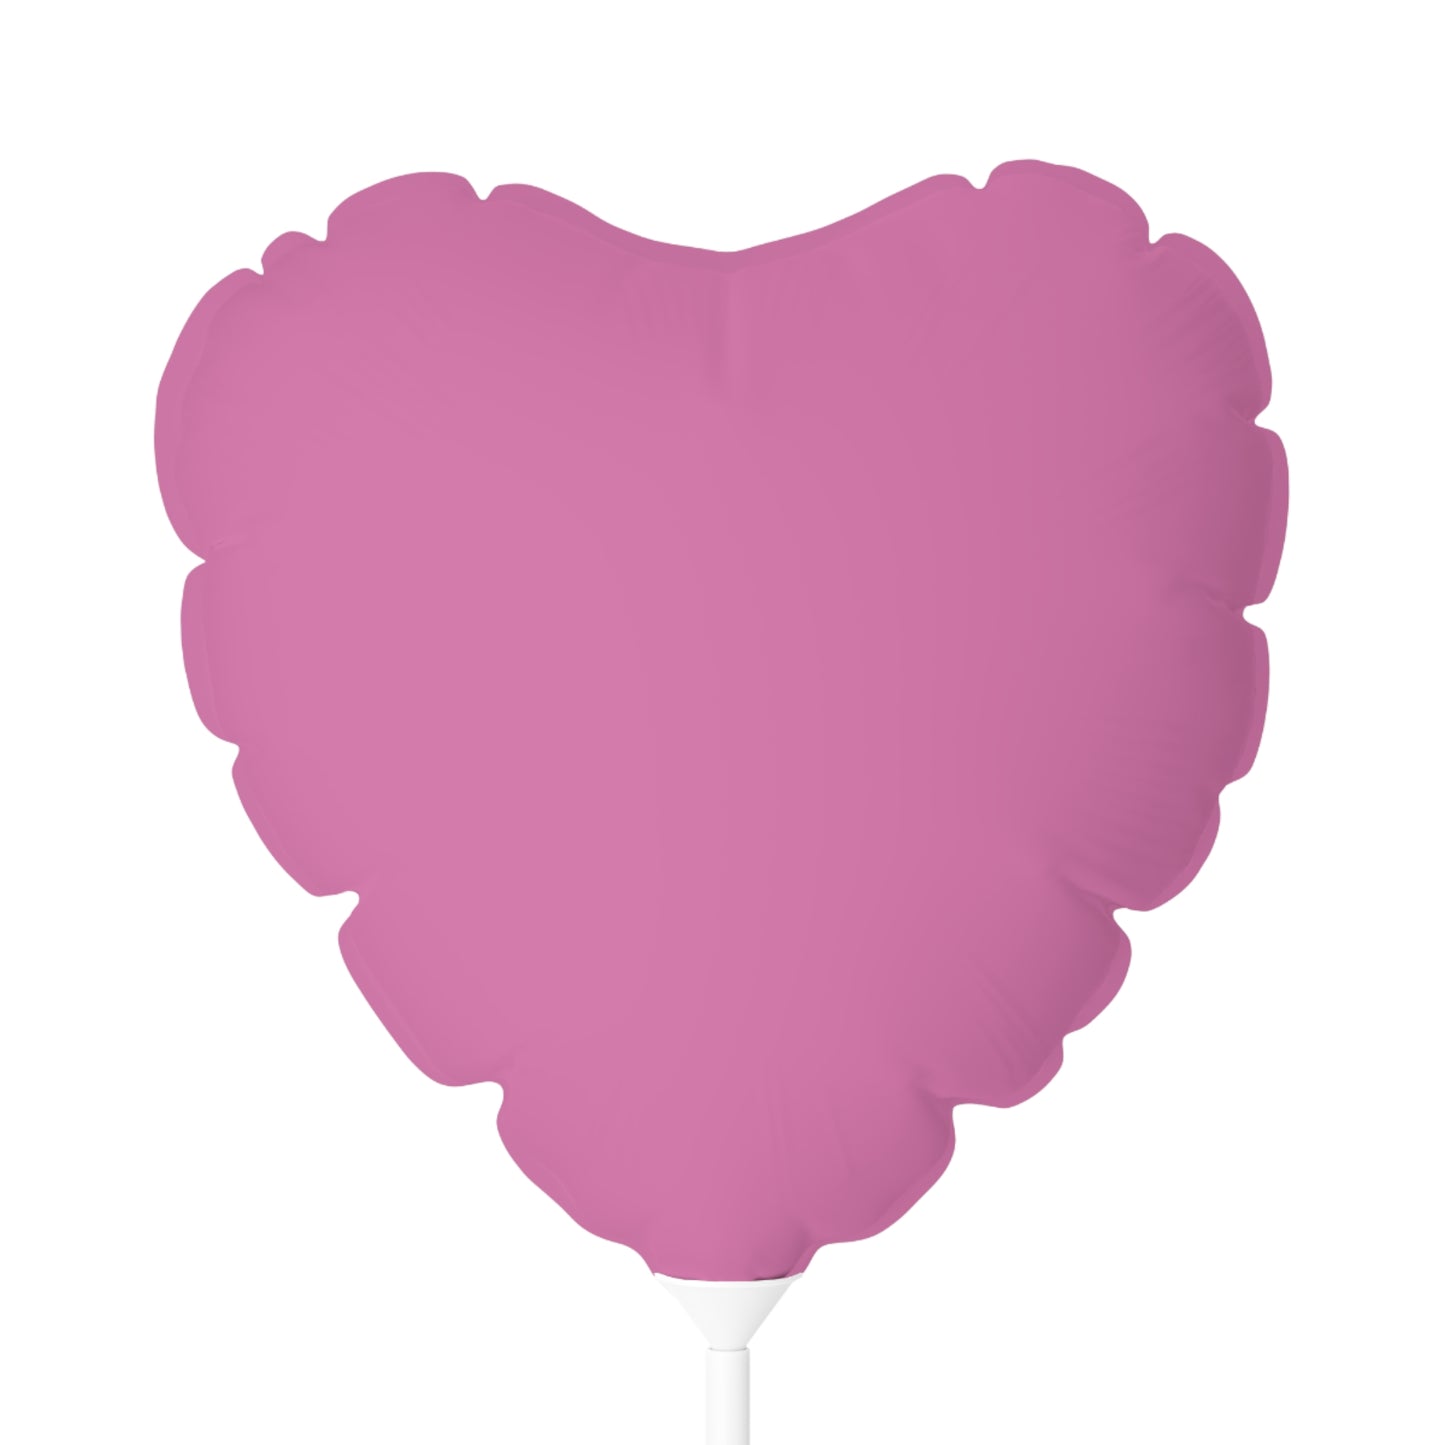 Bold & Beautiful & Metallic Wildflowers, Gorgeous floral Design, Style 6 Balloon (Round and Heart-shaped), 11"